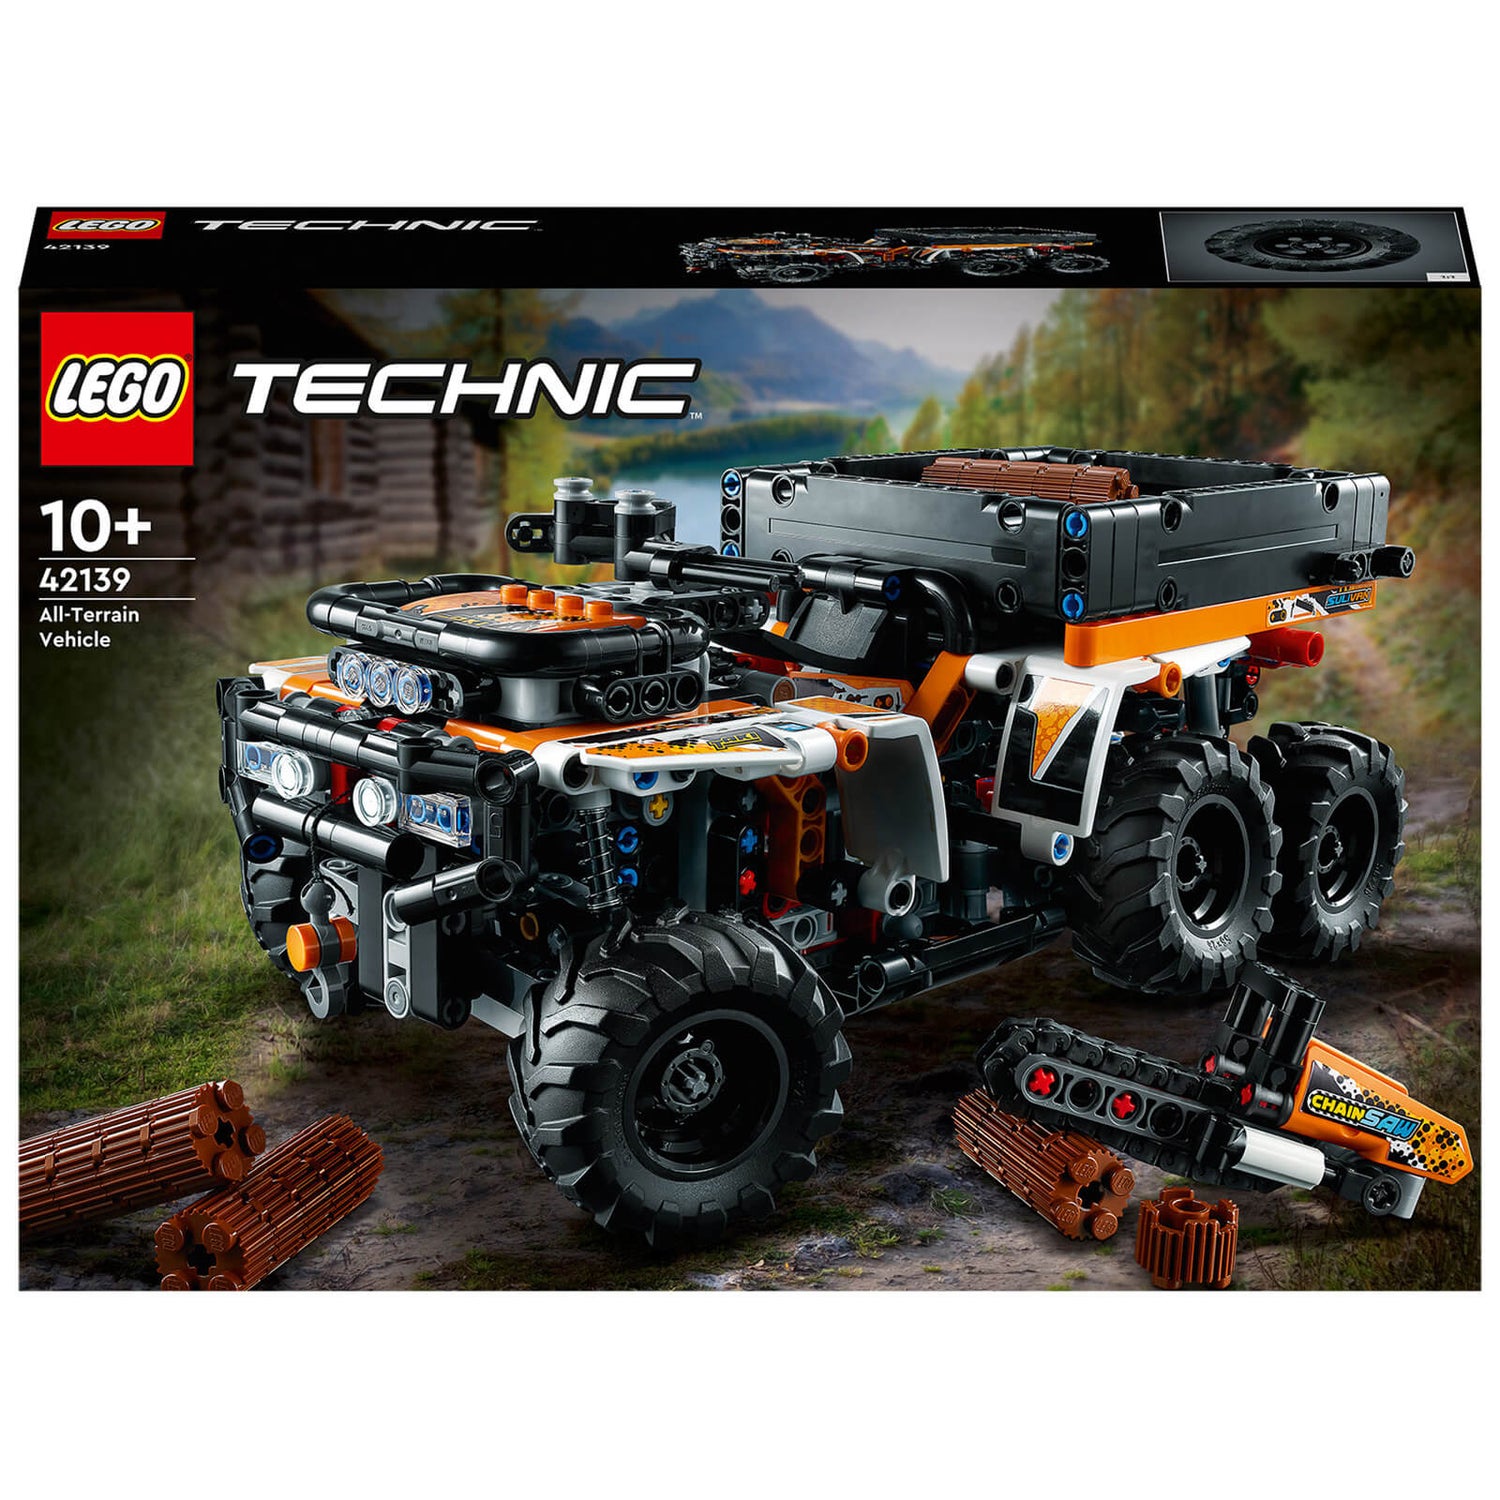 LEGO Technic: All-Terrain Vehicle Off Roader Truck Toy (42139)